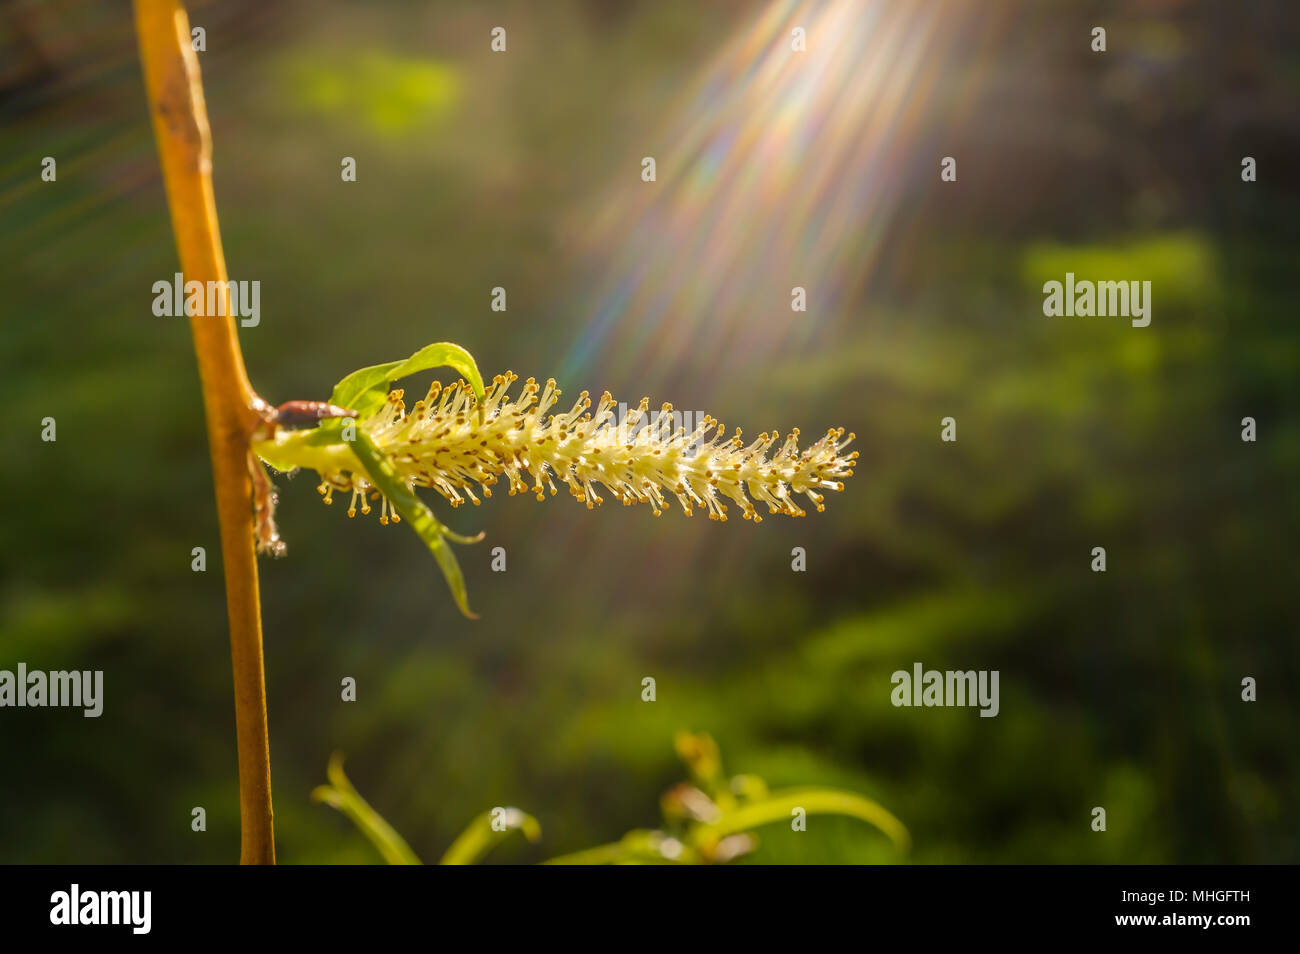 weeping willow catkin caught in a sun beam lens flare Stock Photo